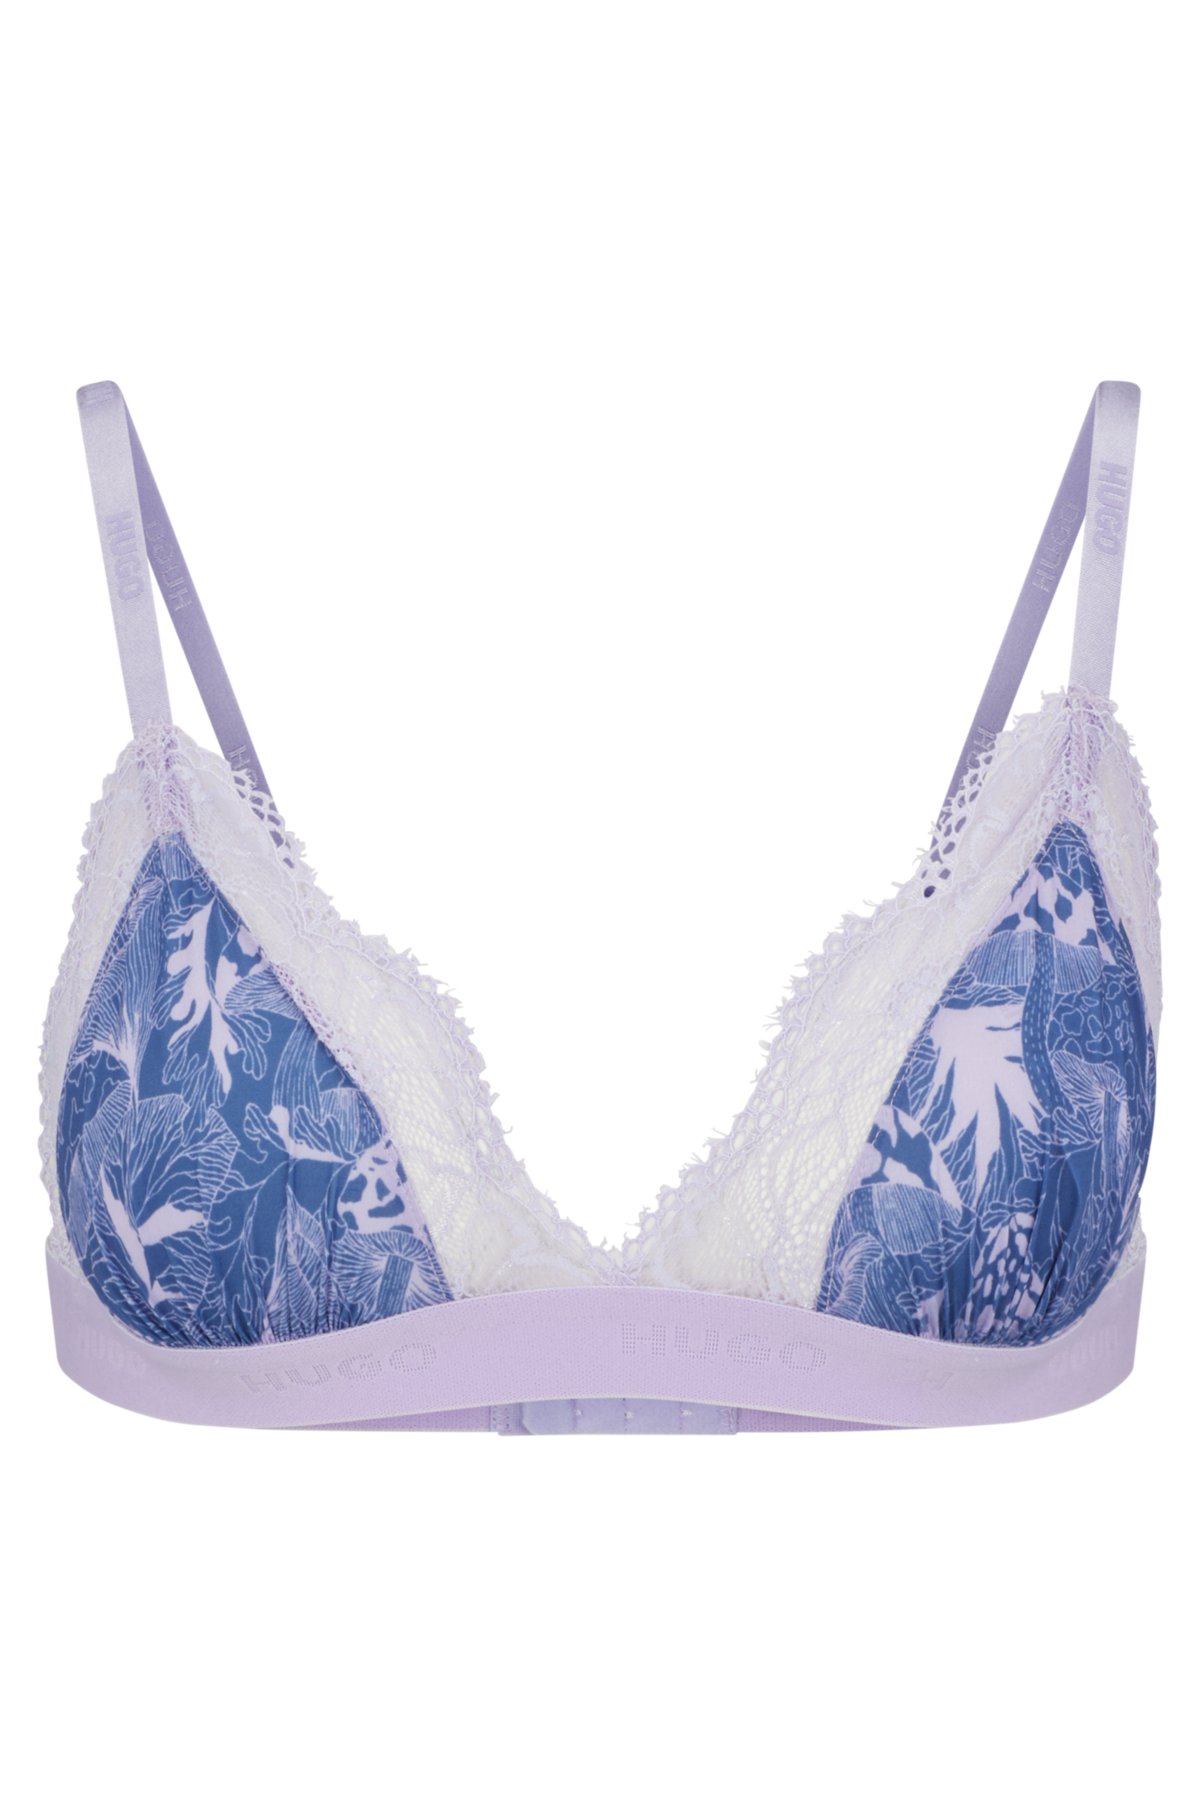 Bra & Panty Set with Lace Overlay